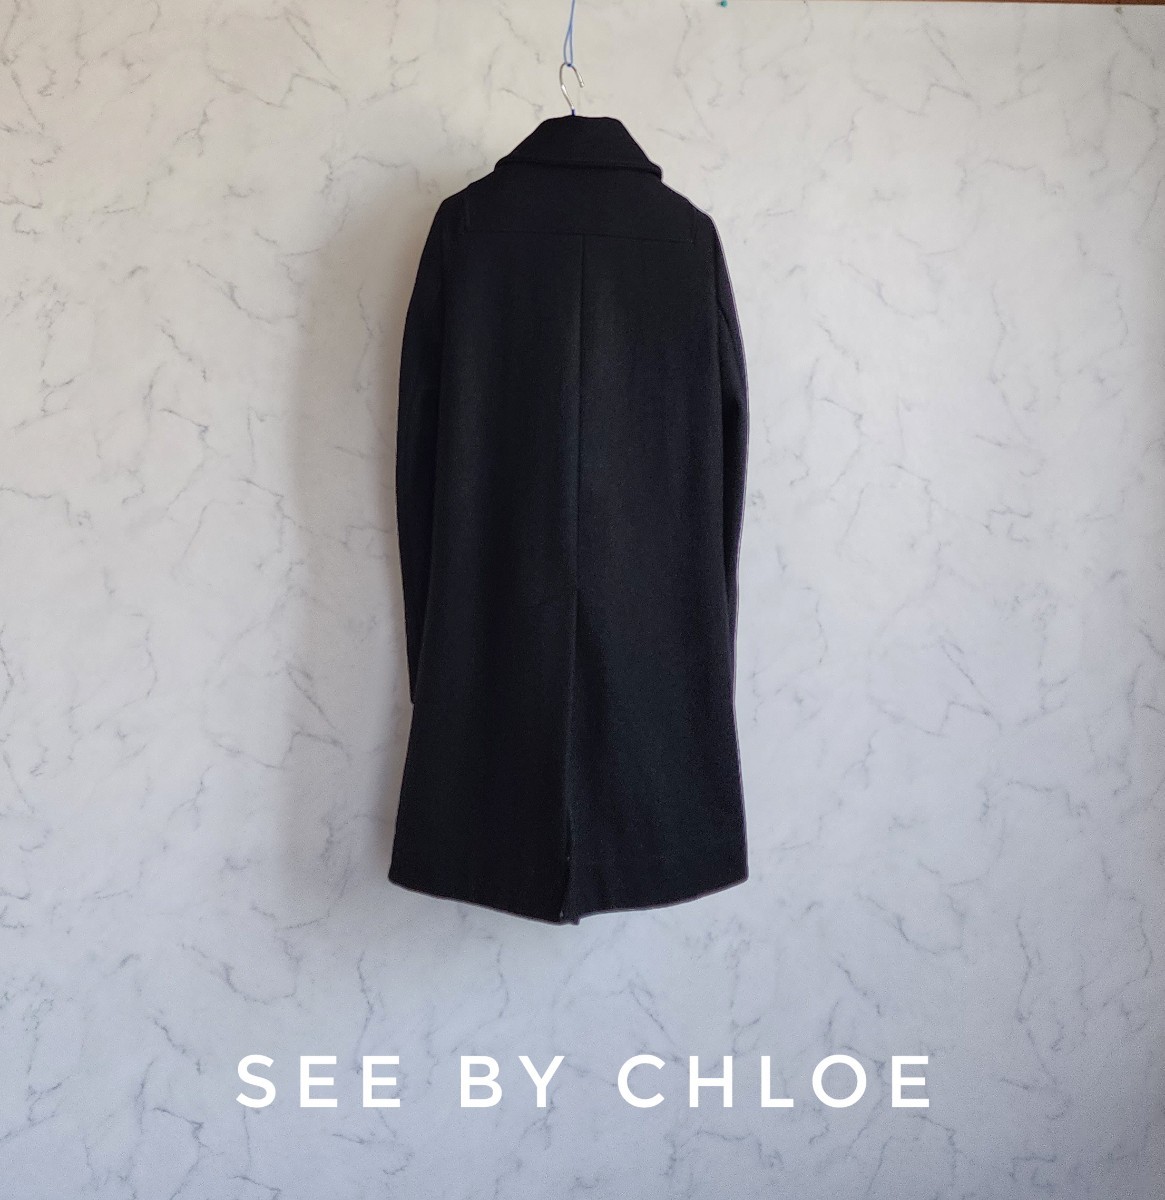  super high class beautiful goods See By Chlo gorgeous stylish modern black coat See by Chloe check lining one class goods cloth 